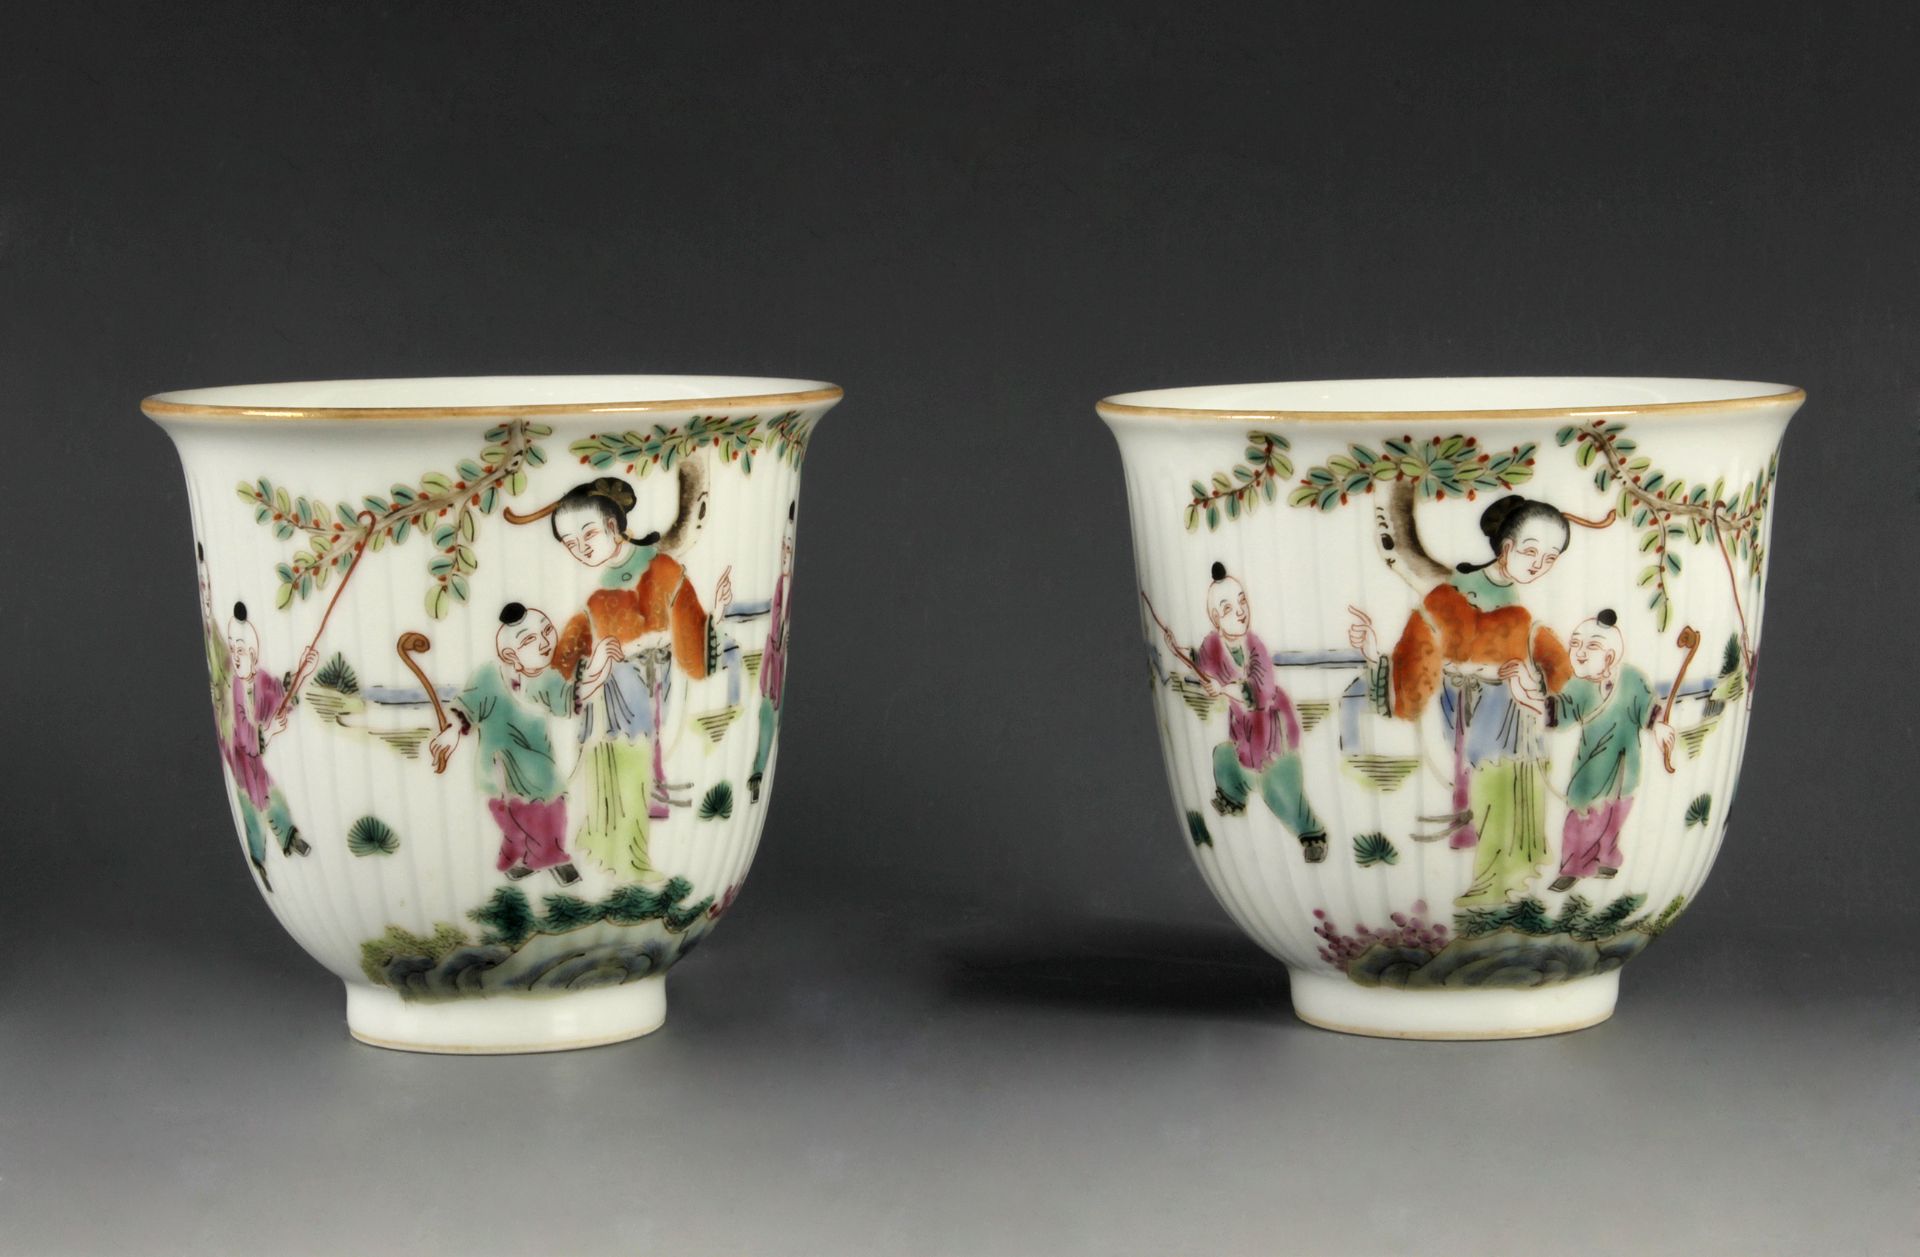 A pair of 19th century Chinese Qing dynasty porcelain cups